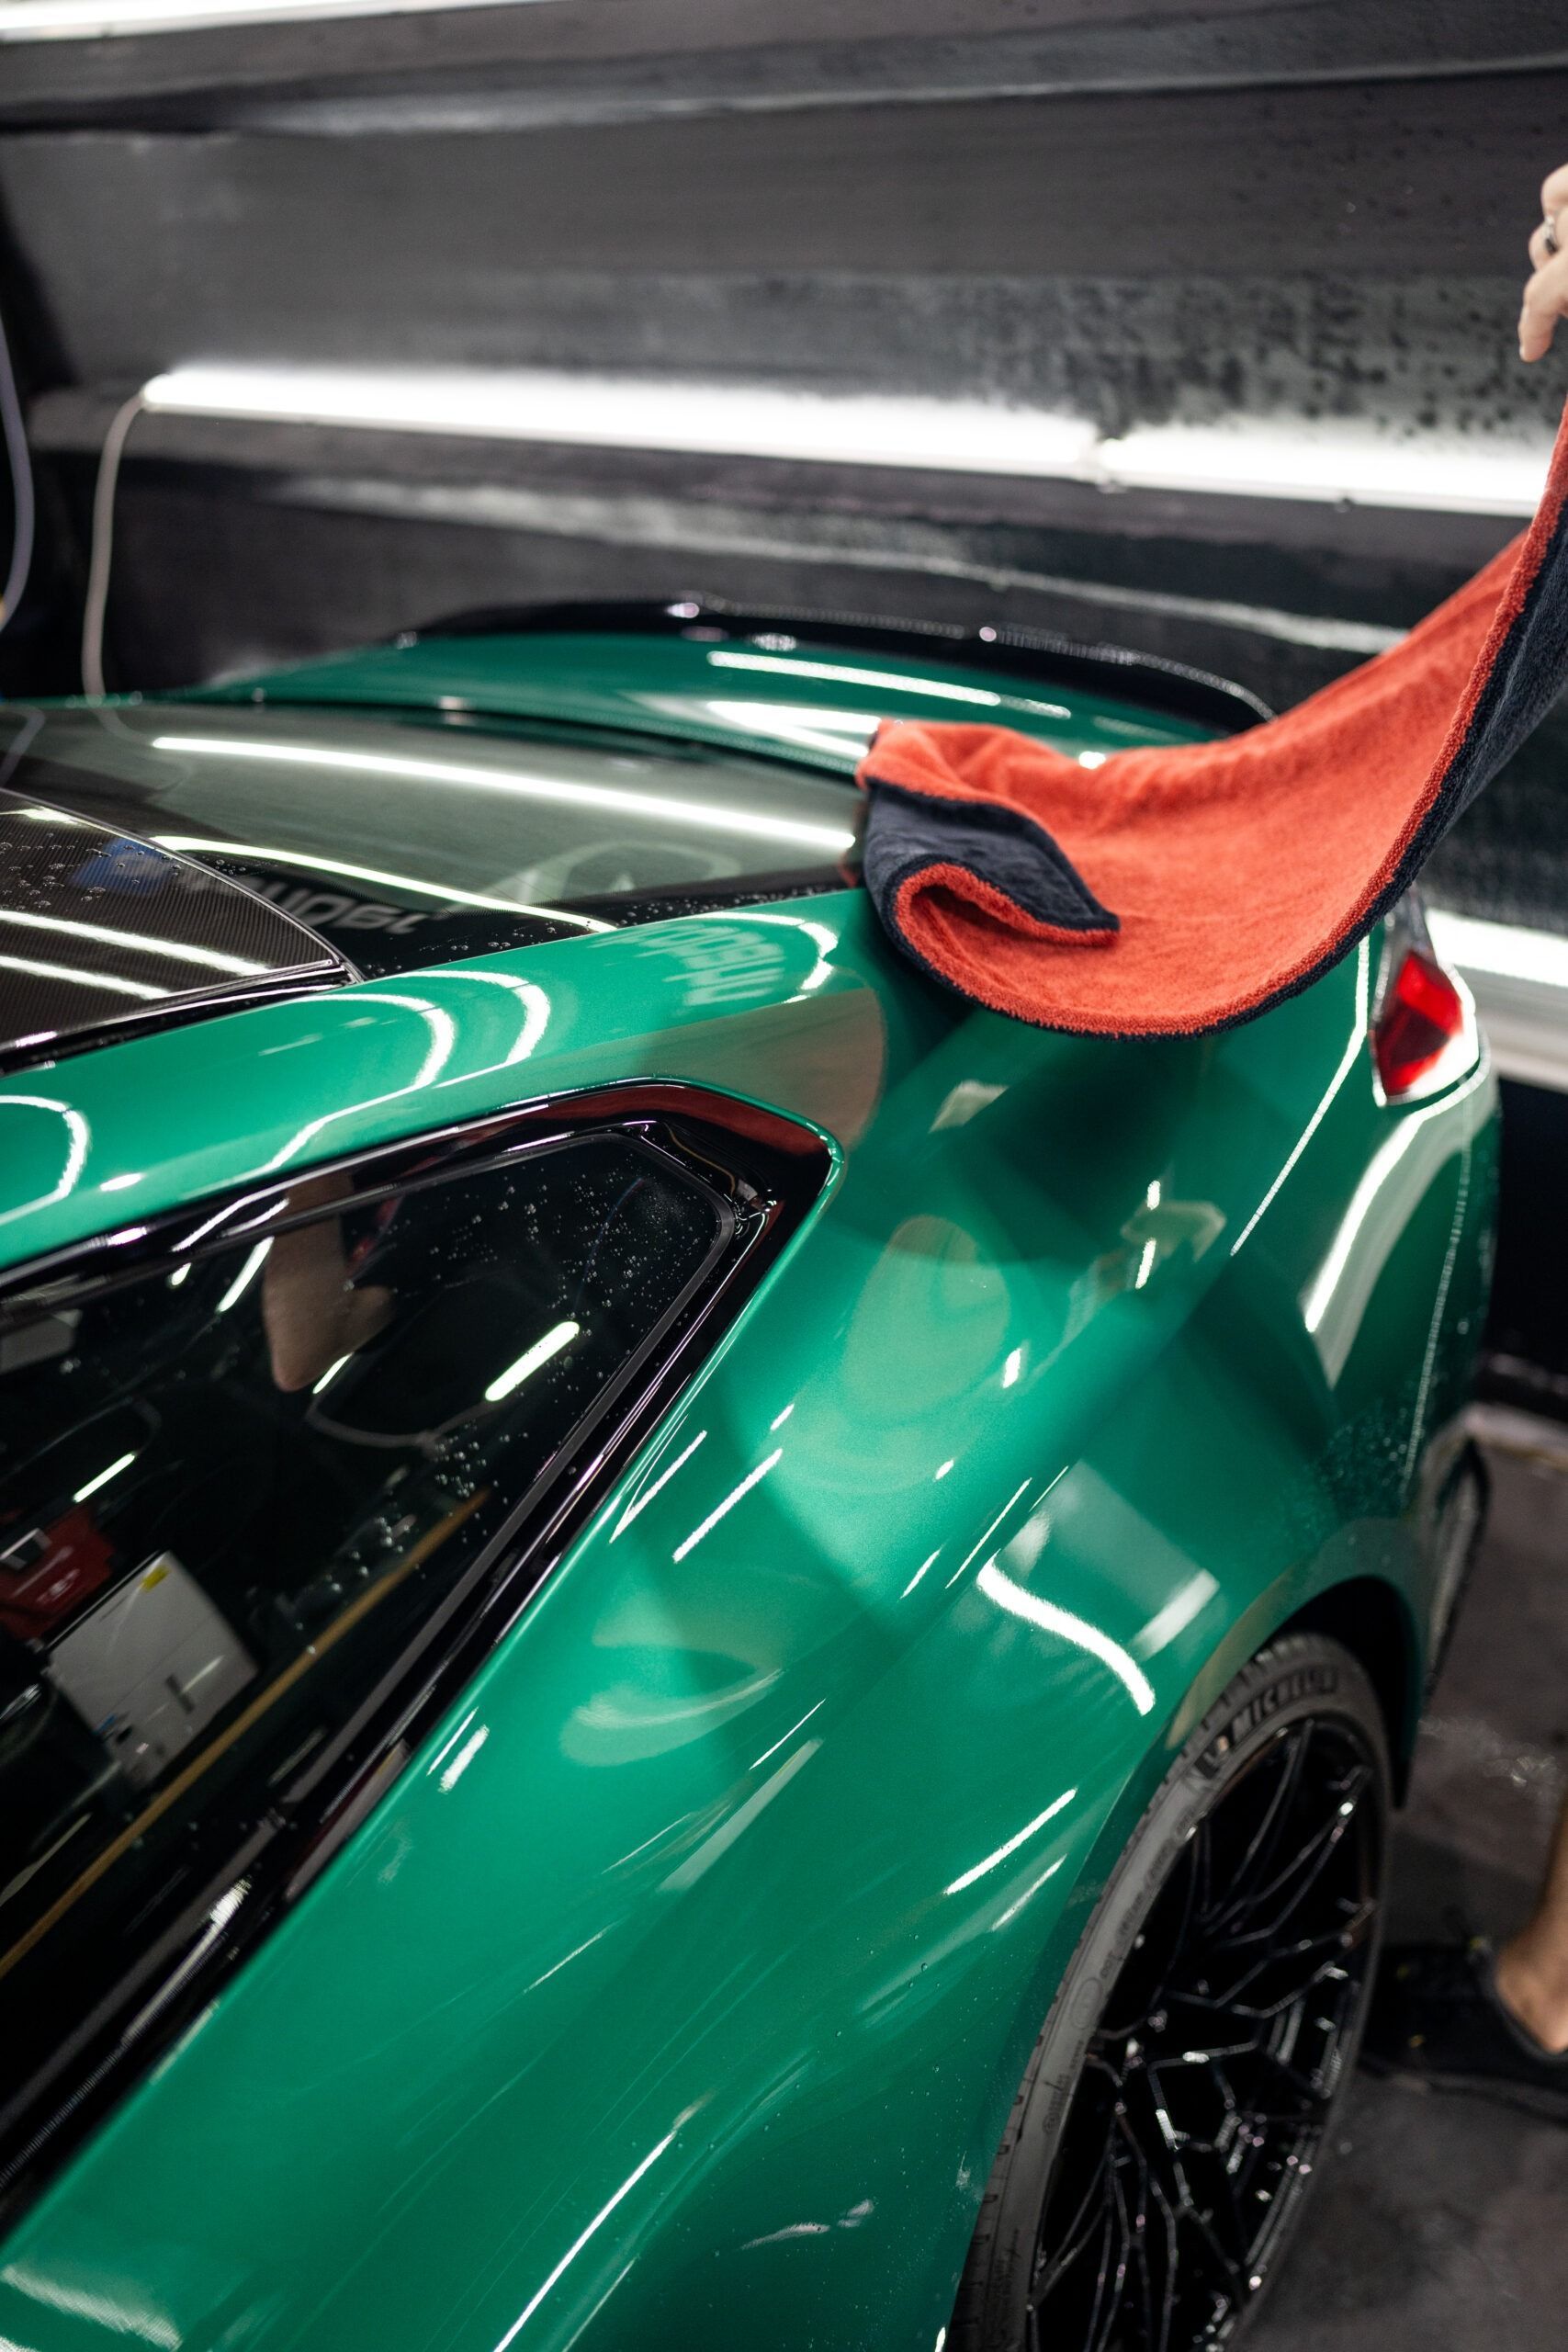 A person is cleaning a green sports car with a towel